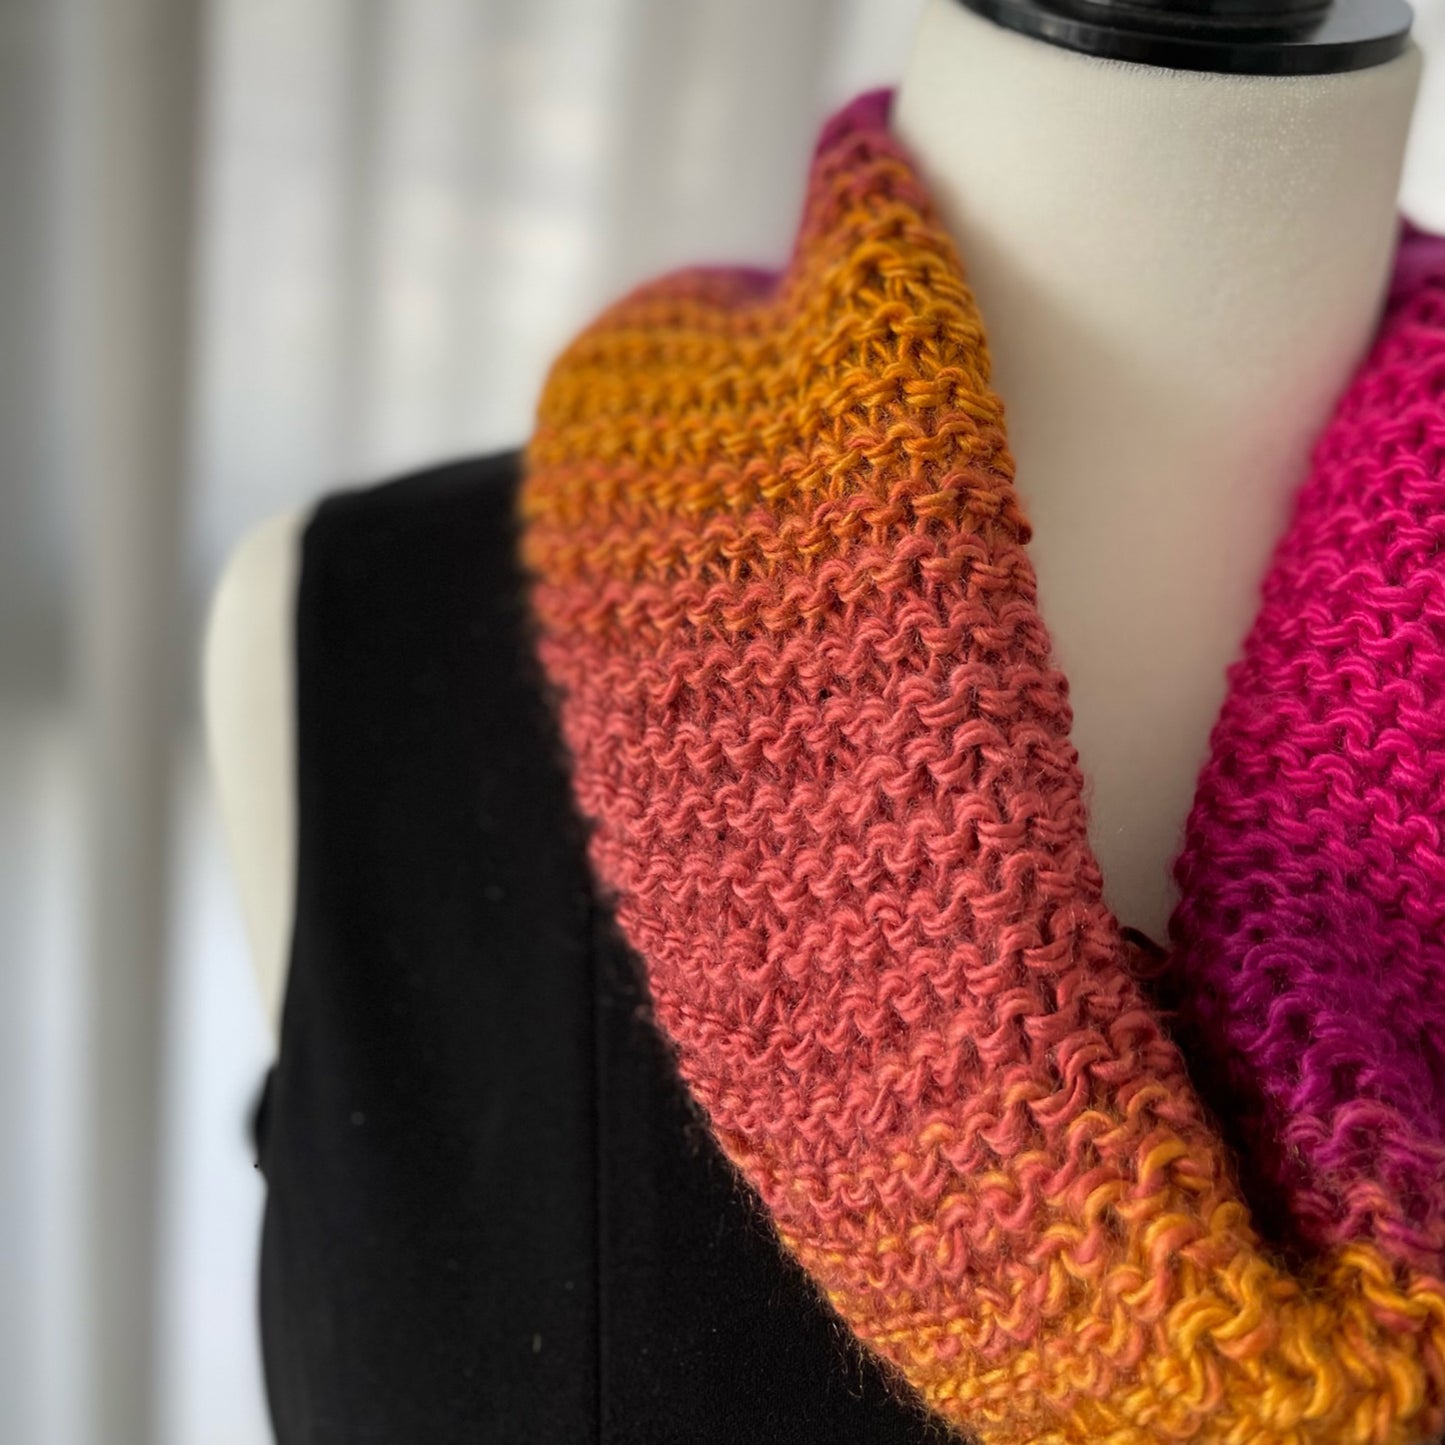 Hand knitted Cowl